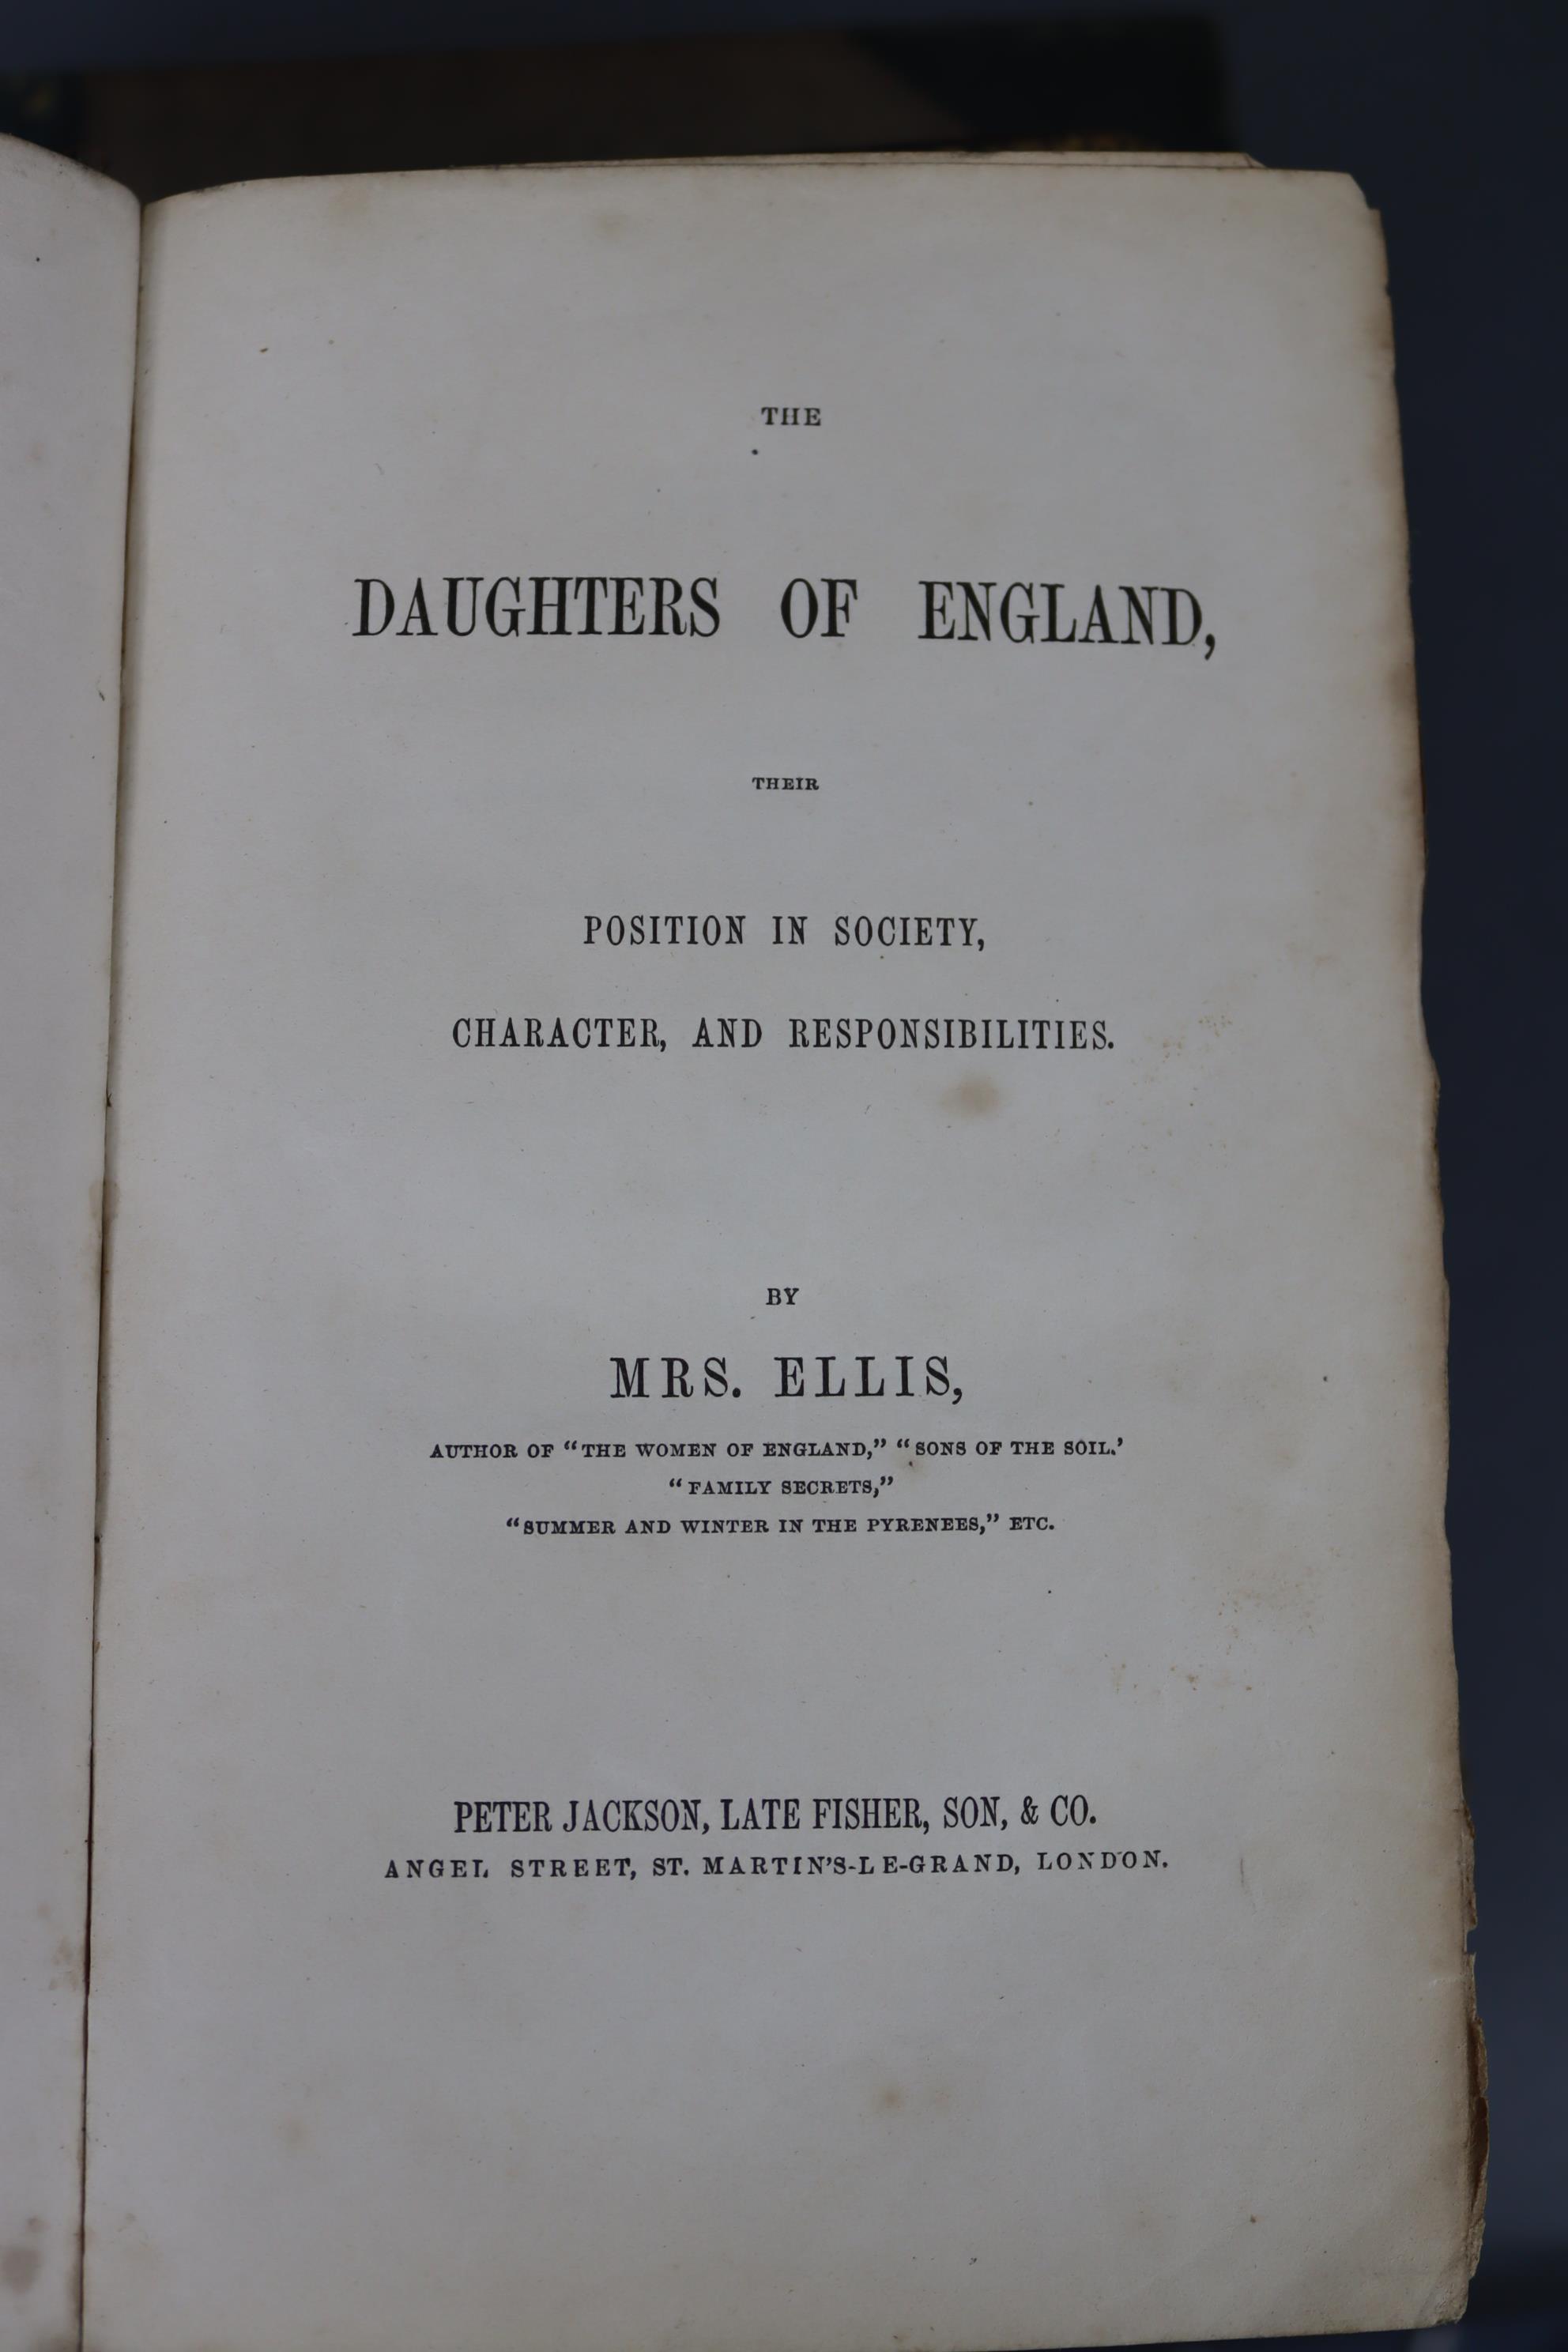 Two 19th century leather-bound volumes by Mrs Ellis “The Daughters of England” & “The Women of - Image 20 of 22